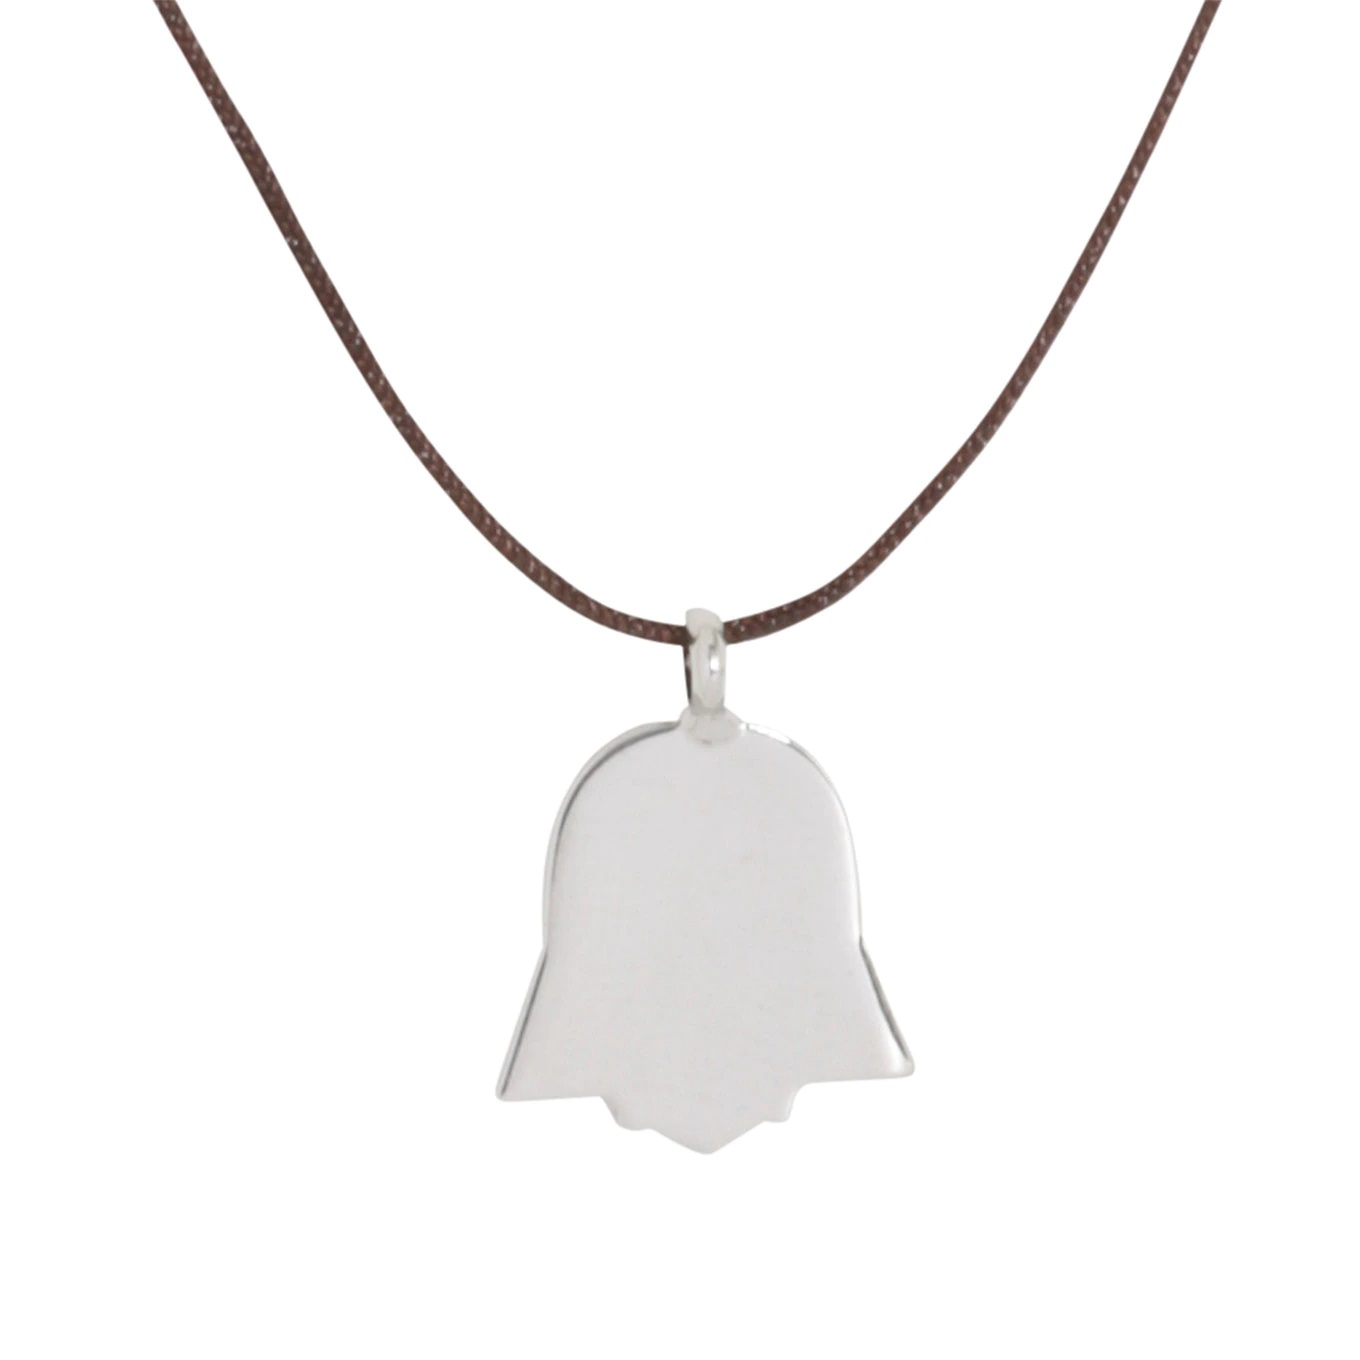 Love And Madness x Star Wars Darth Vader Silhouette Necklace at Hot Topic